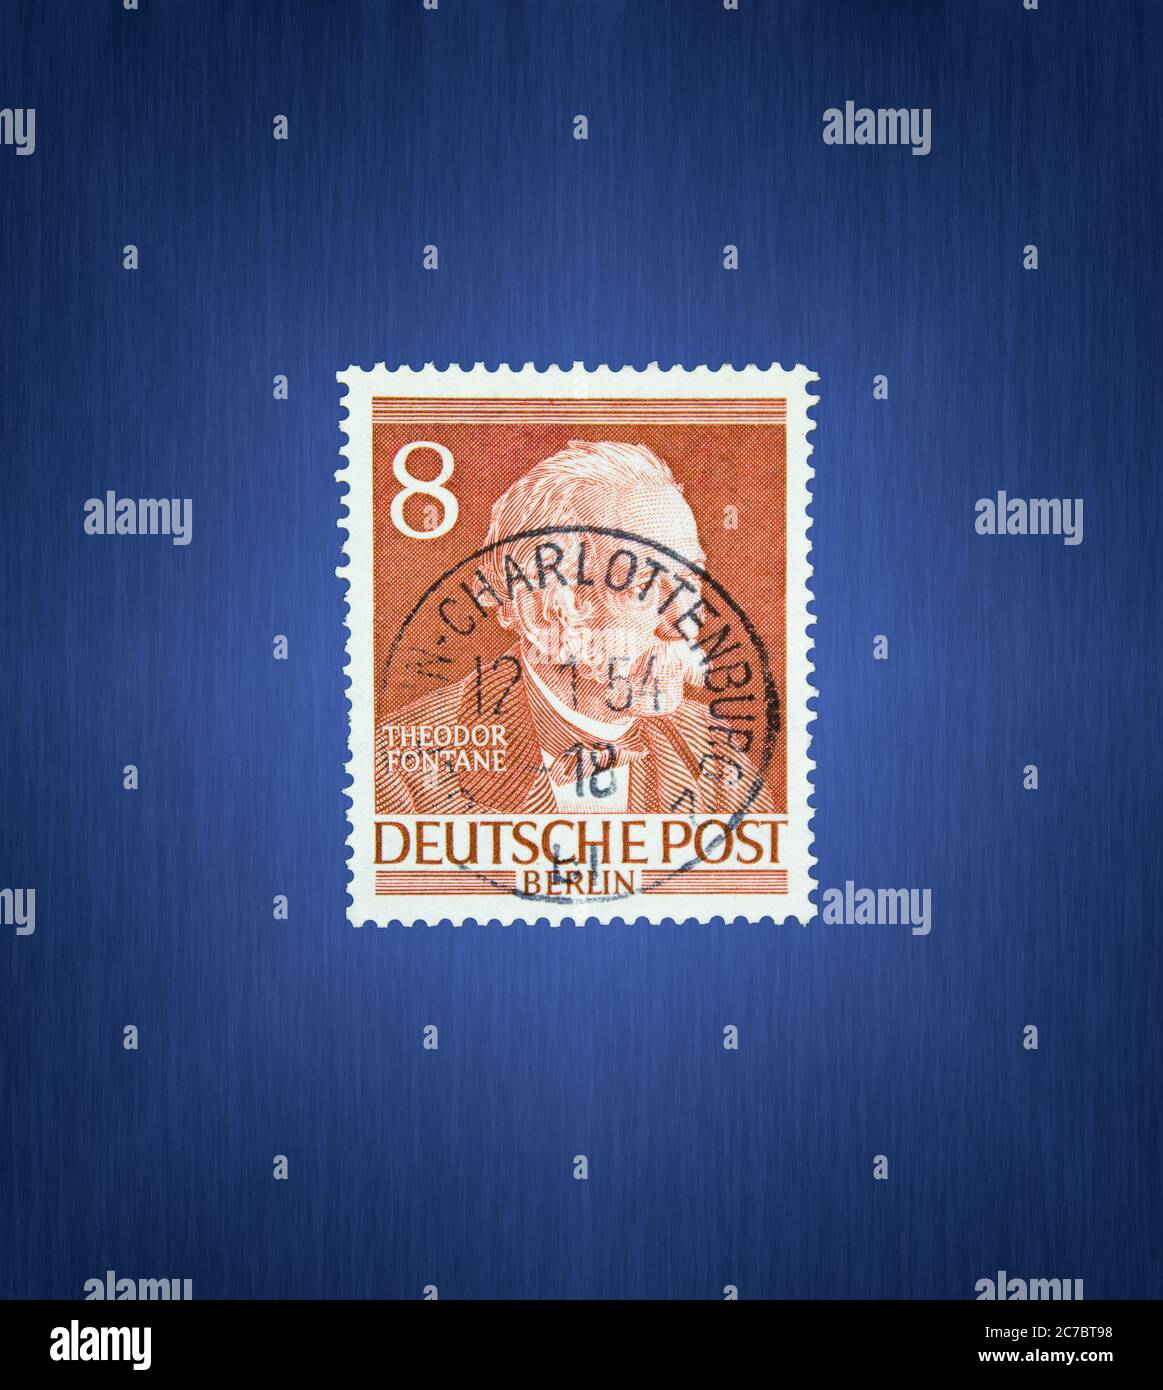 Postage stamp from the FRG Berlin. Printed on 07.03.1953. Theodor Fontane. Stock Photo